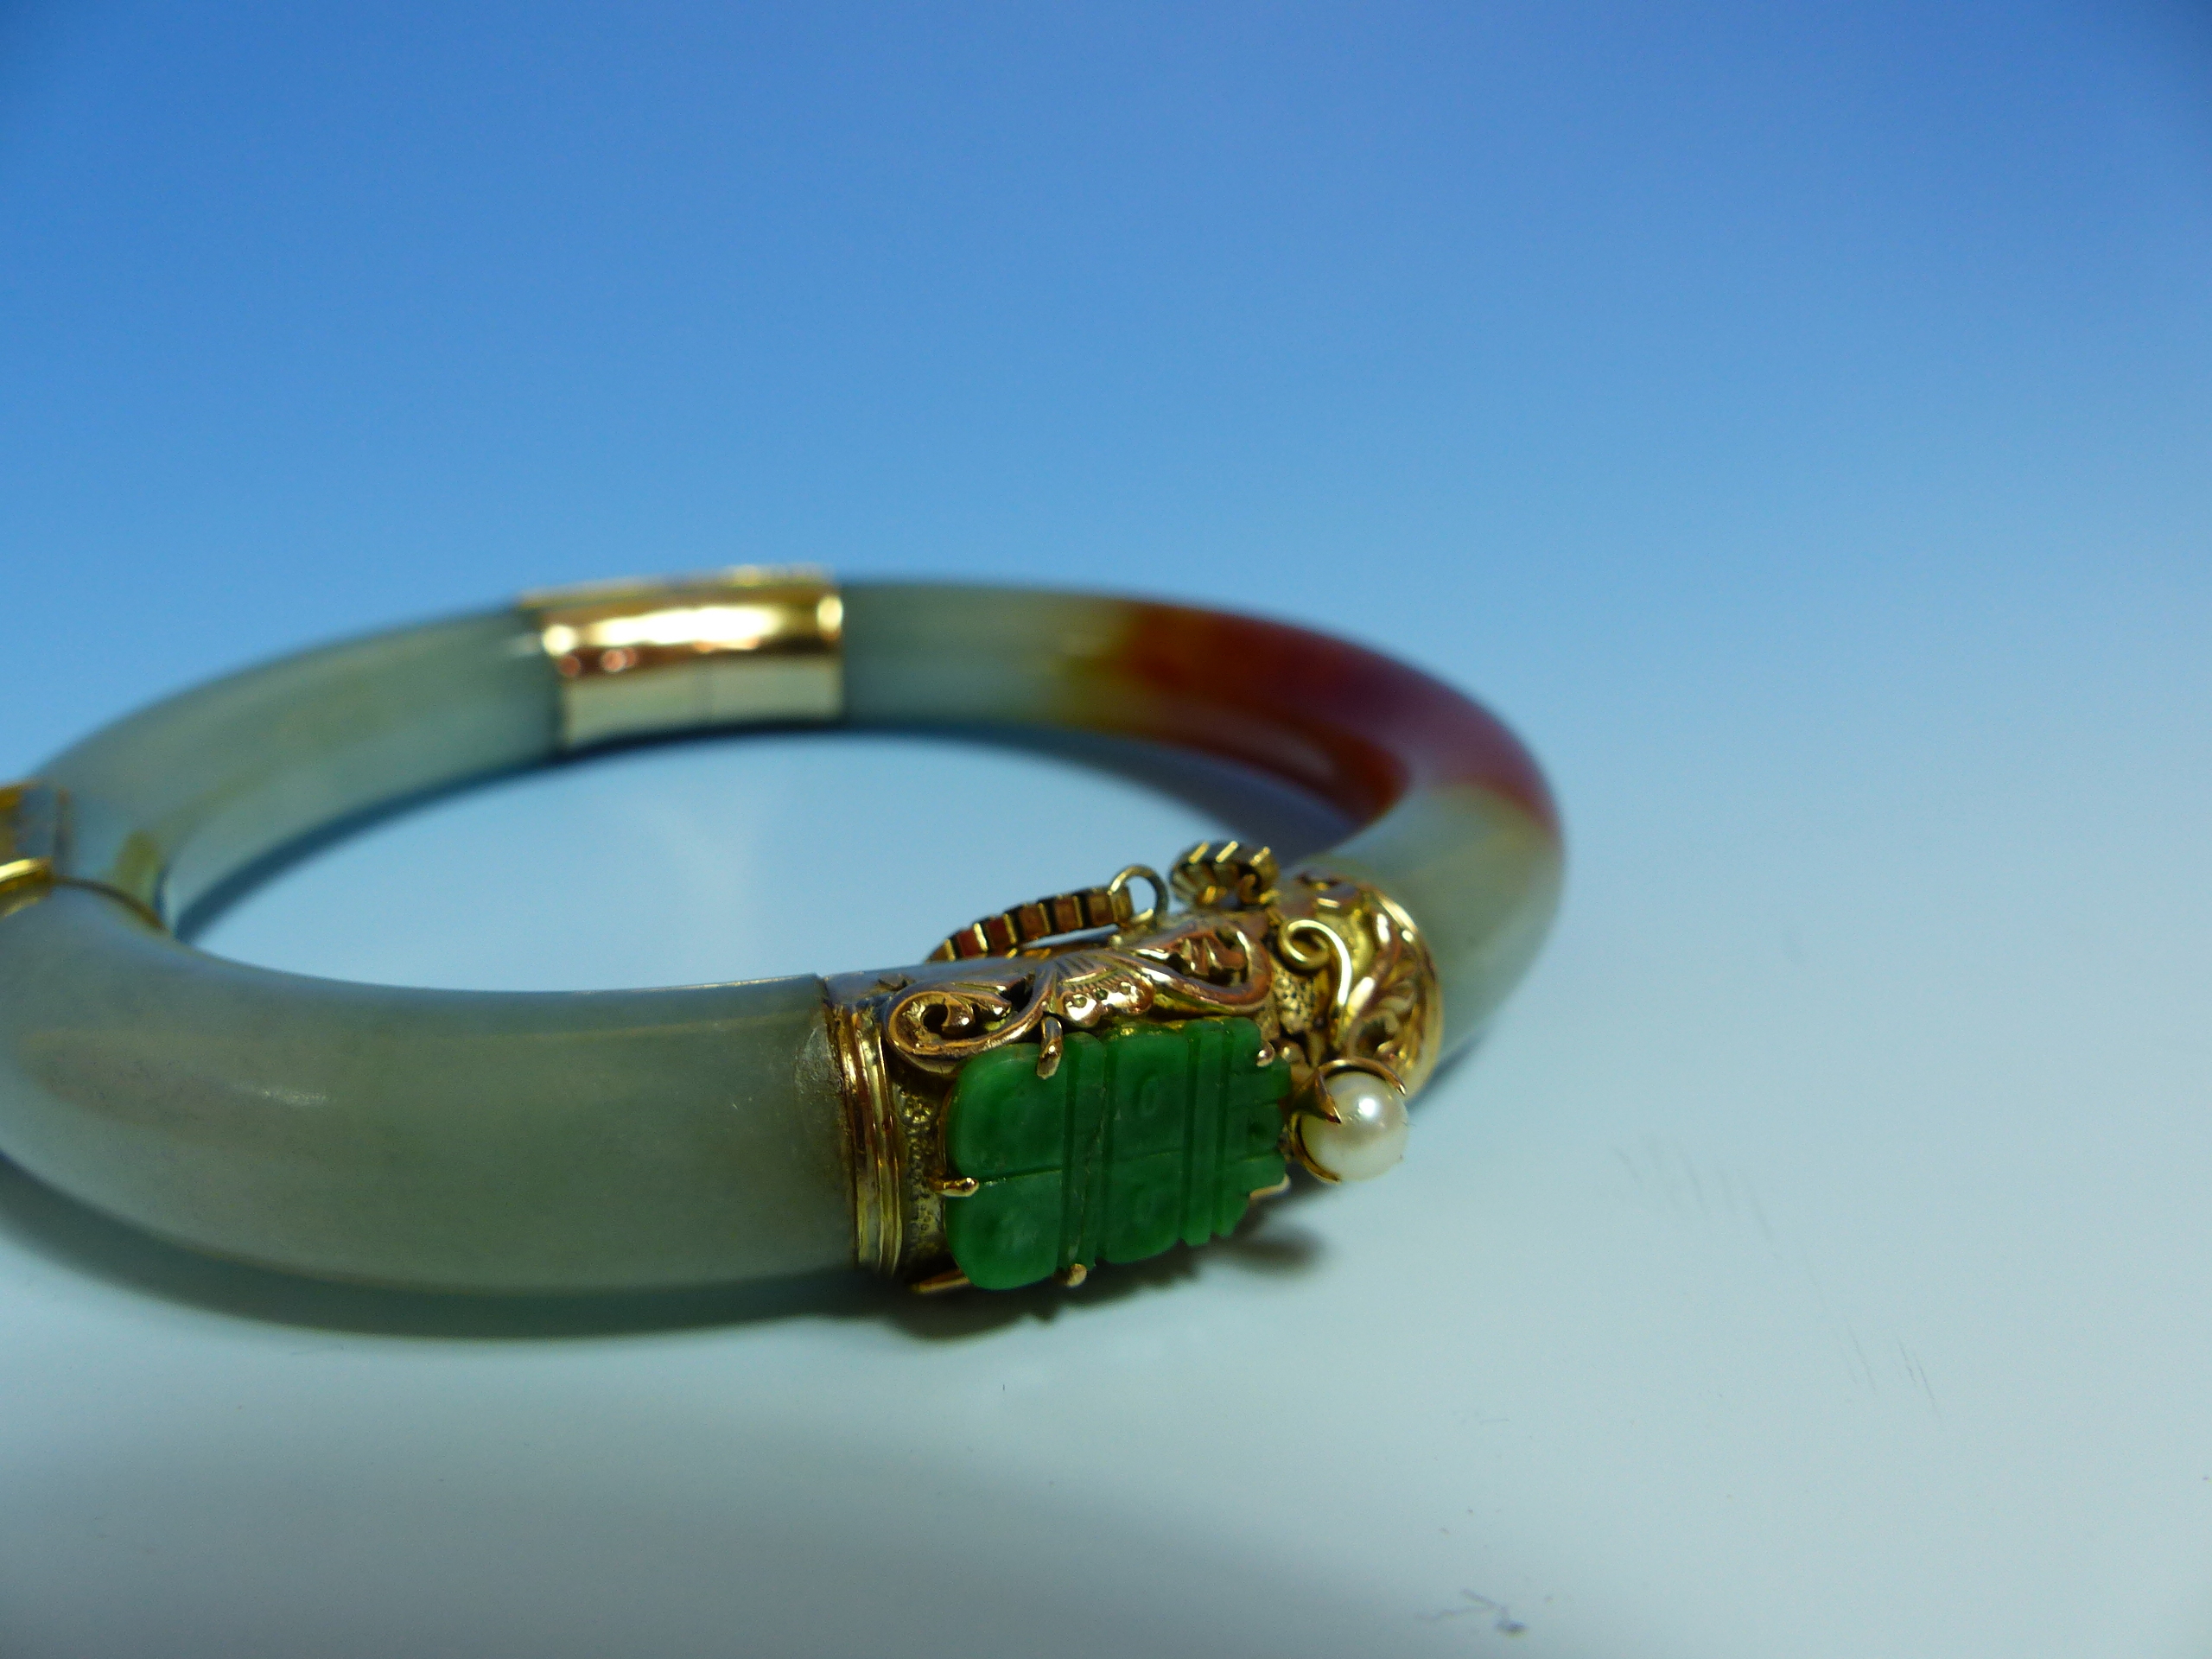 A 14K STAMPED GOLD MOUNTED JADE BANGLE FINISHED WITH A CARVED FISH, JADE AND PEARL CLASP COMPLETE - Image 27 of 38